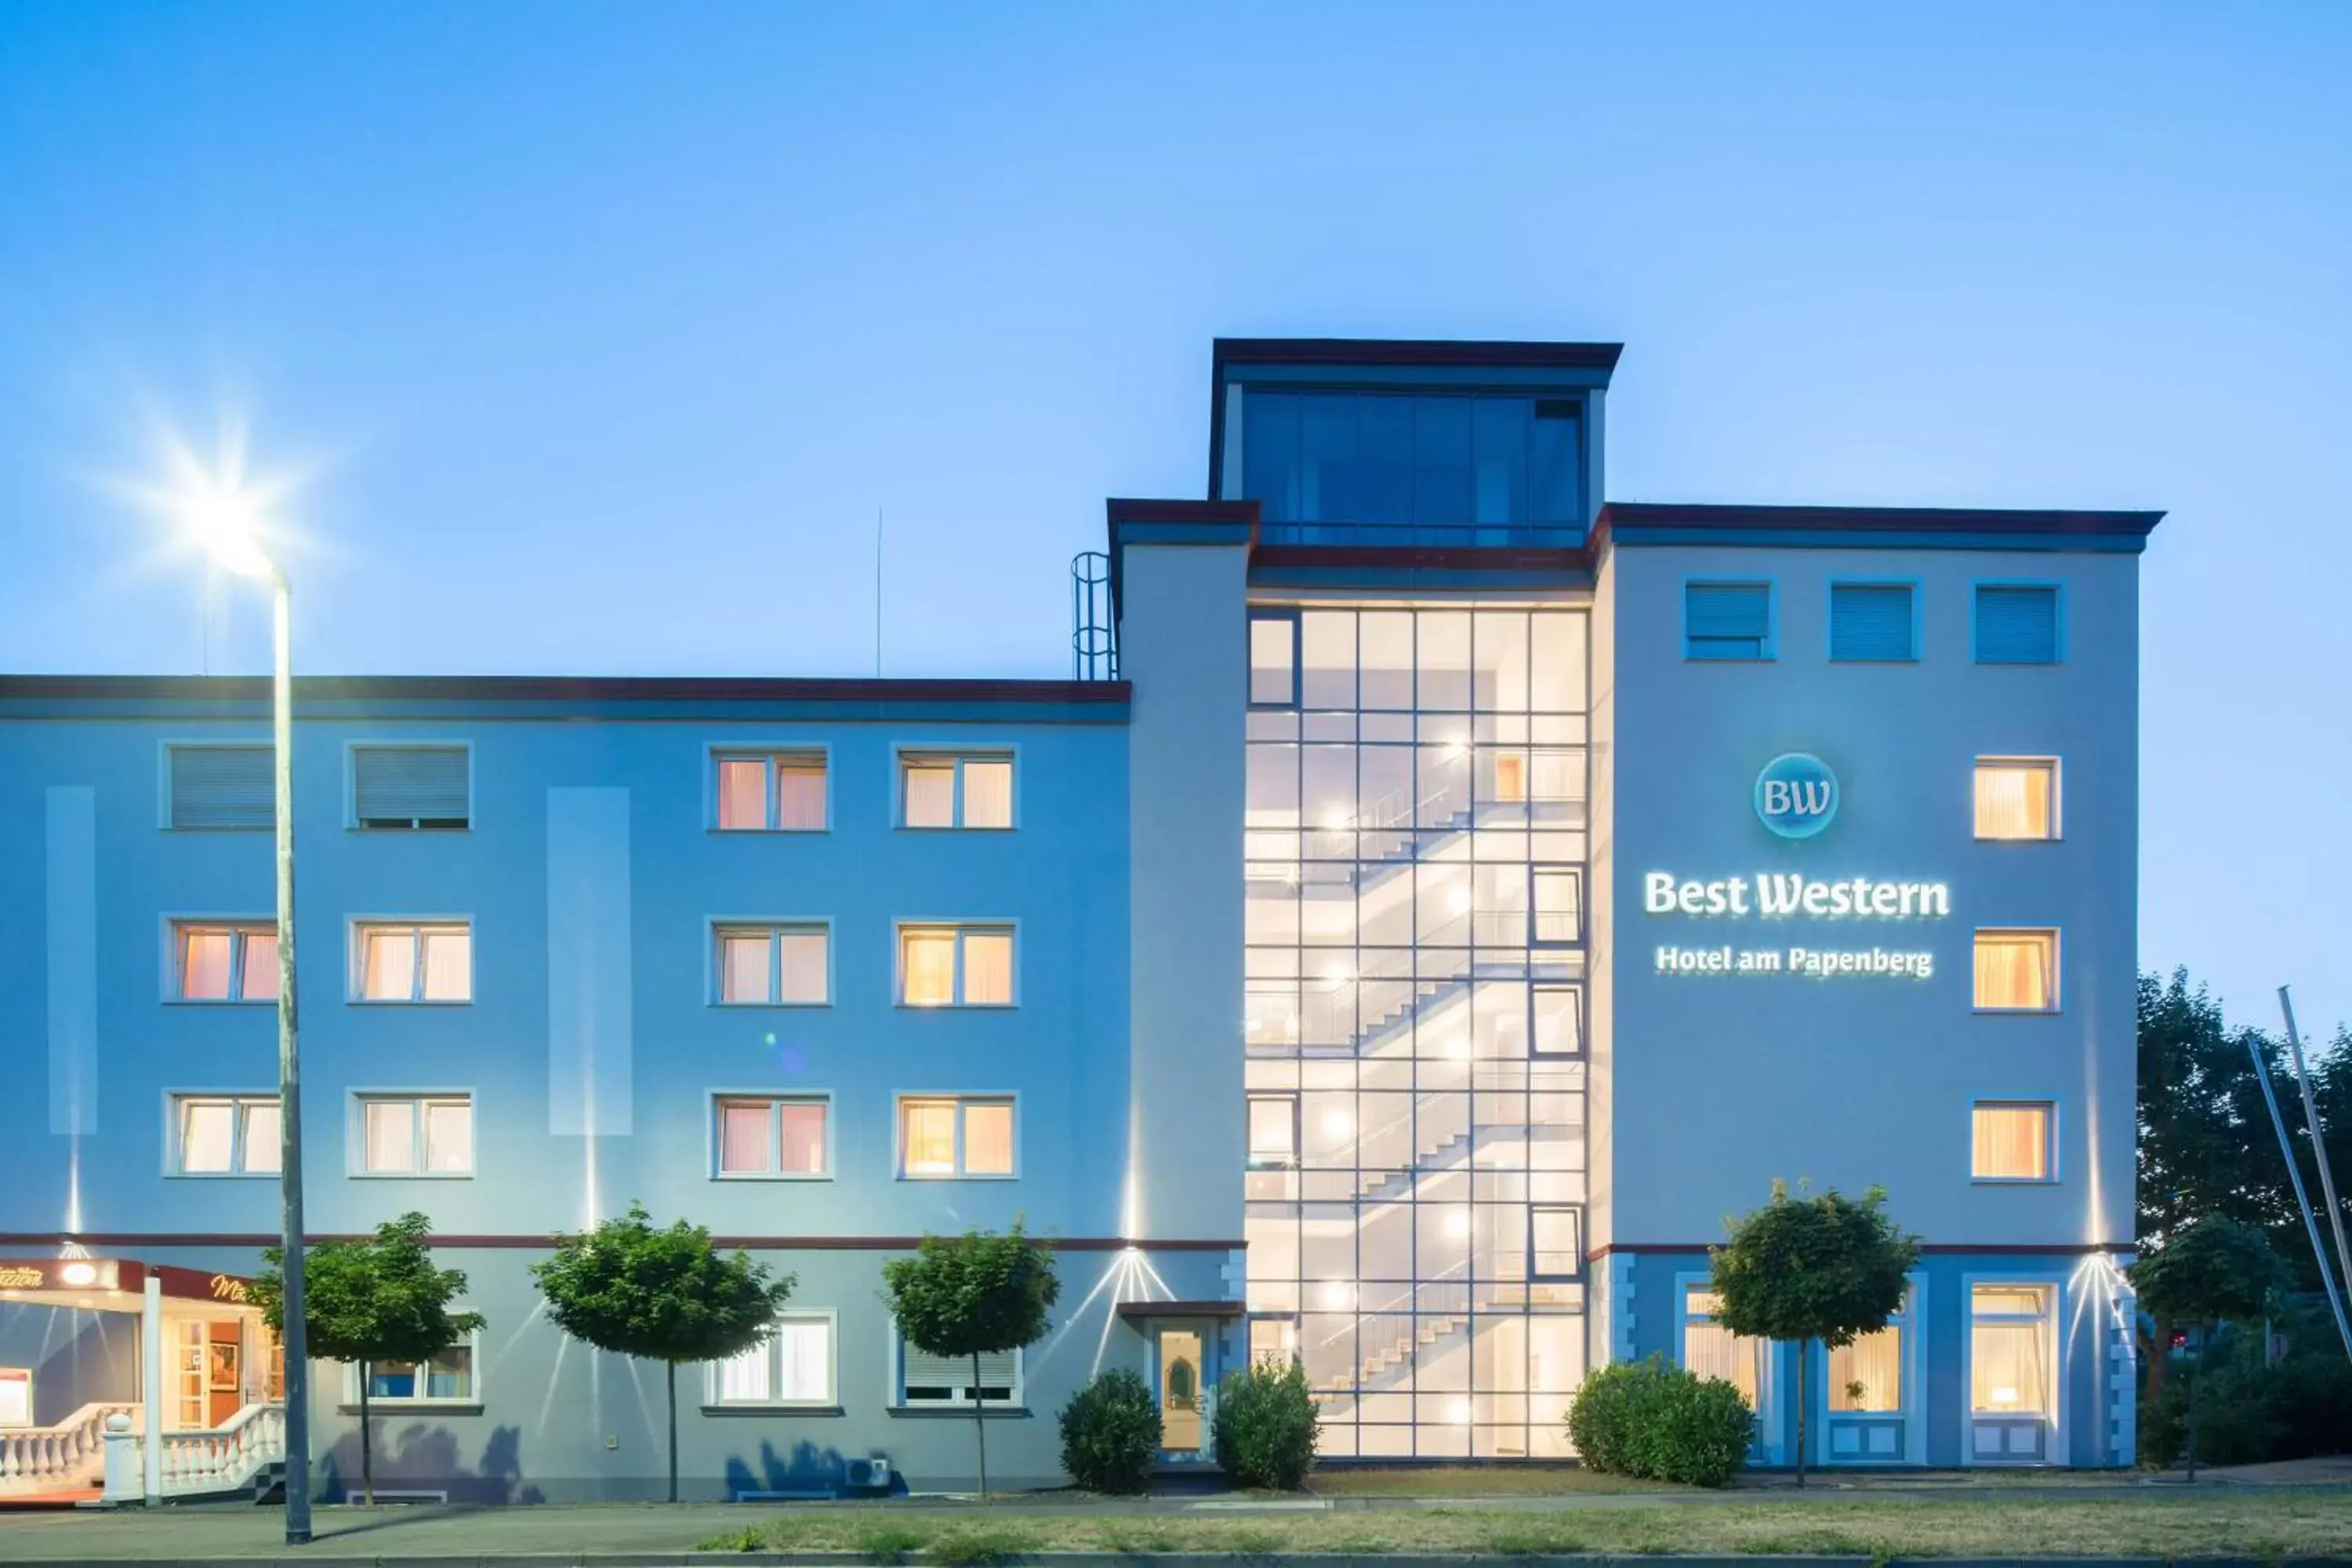 Property building in Best Western Hotel Am Papenberg